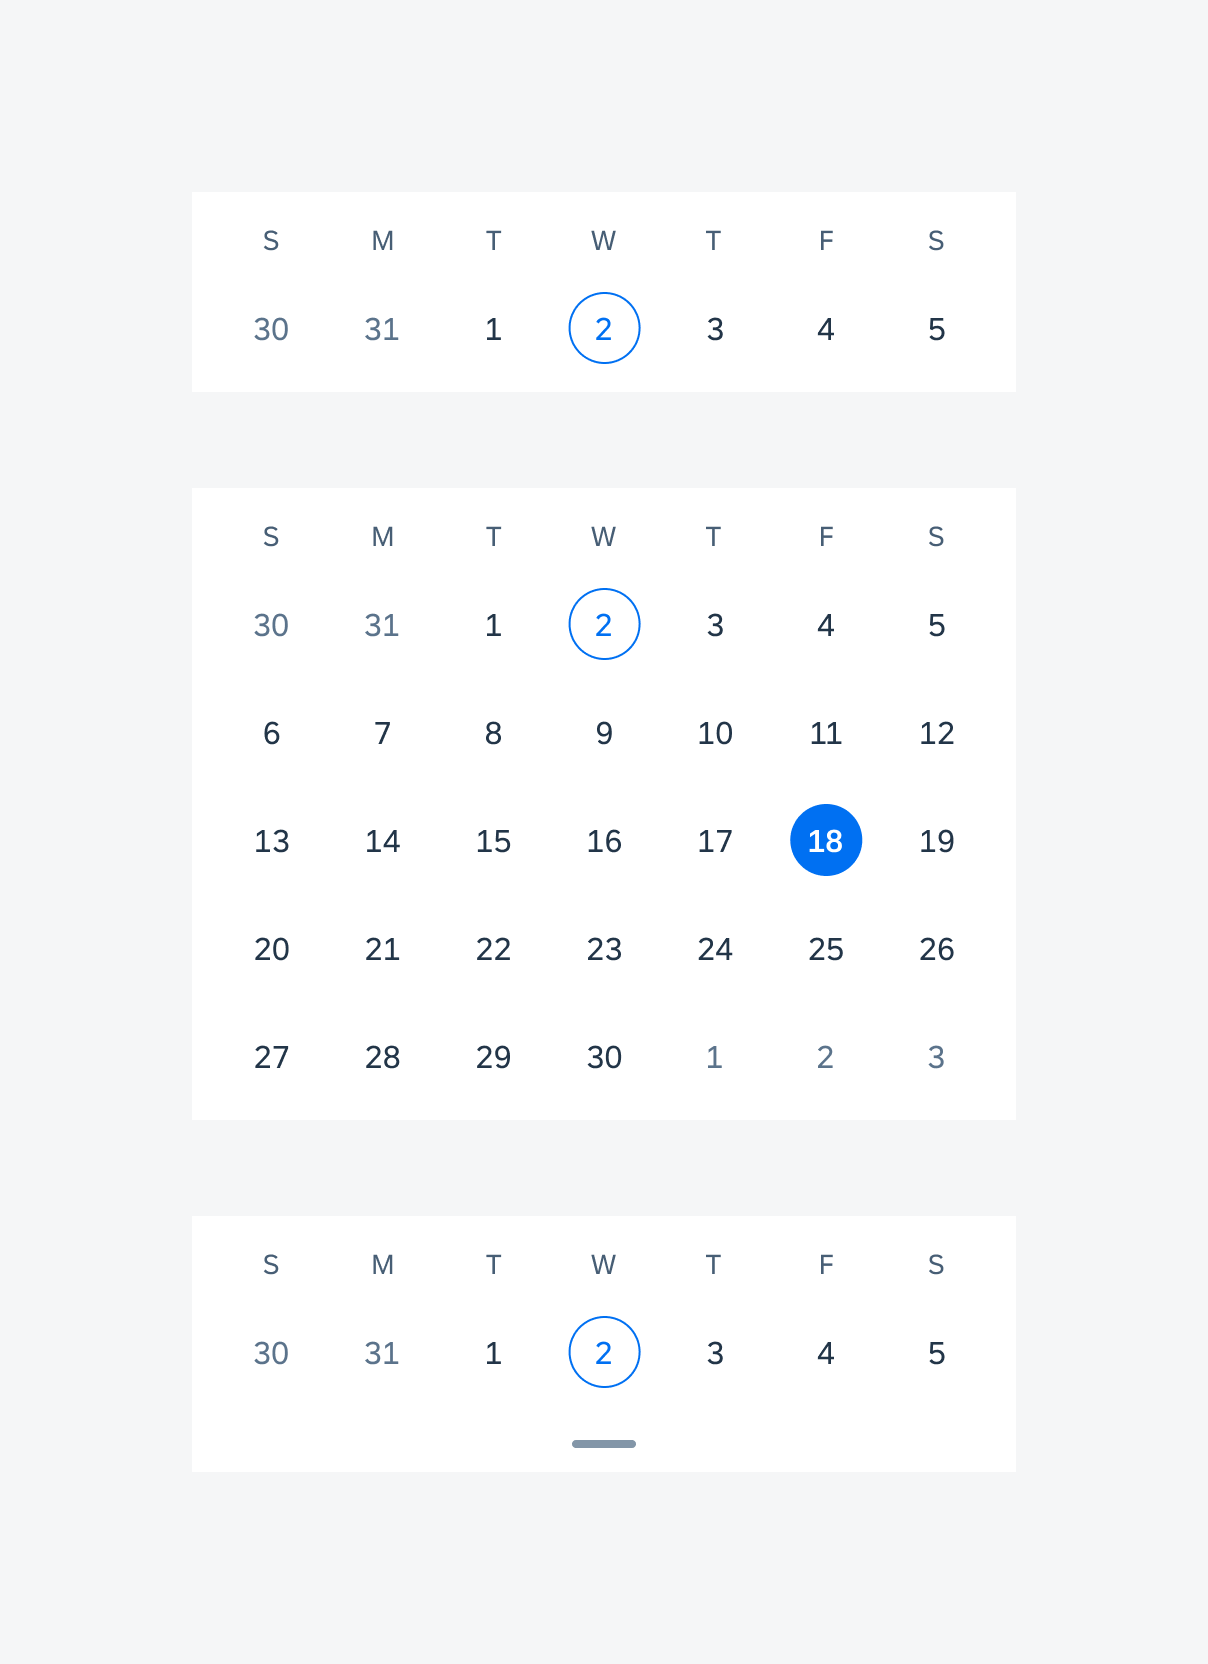 Types of calendar view containers (from top to bottom): week view, month view, and expandable view